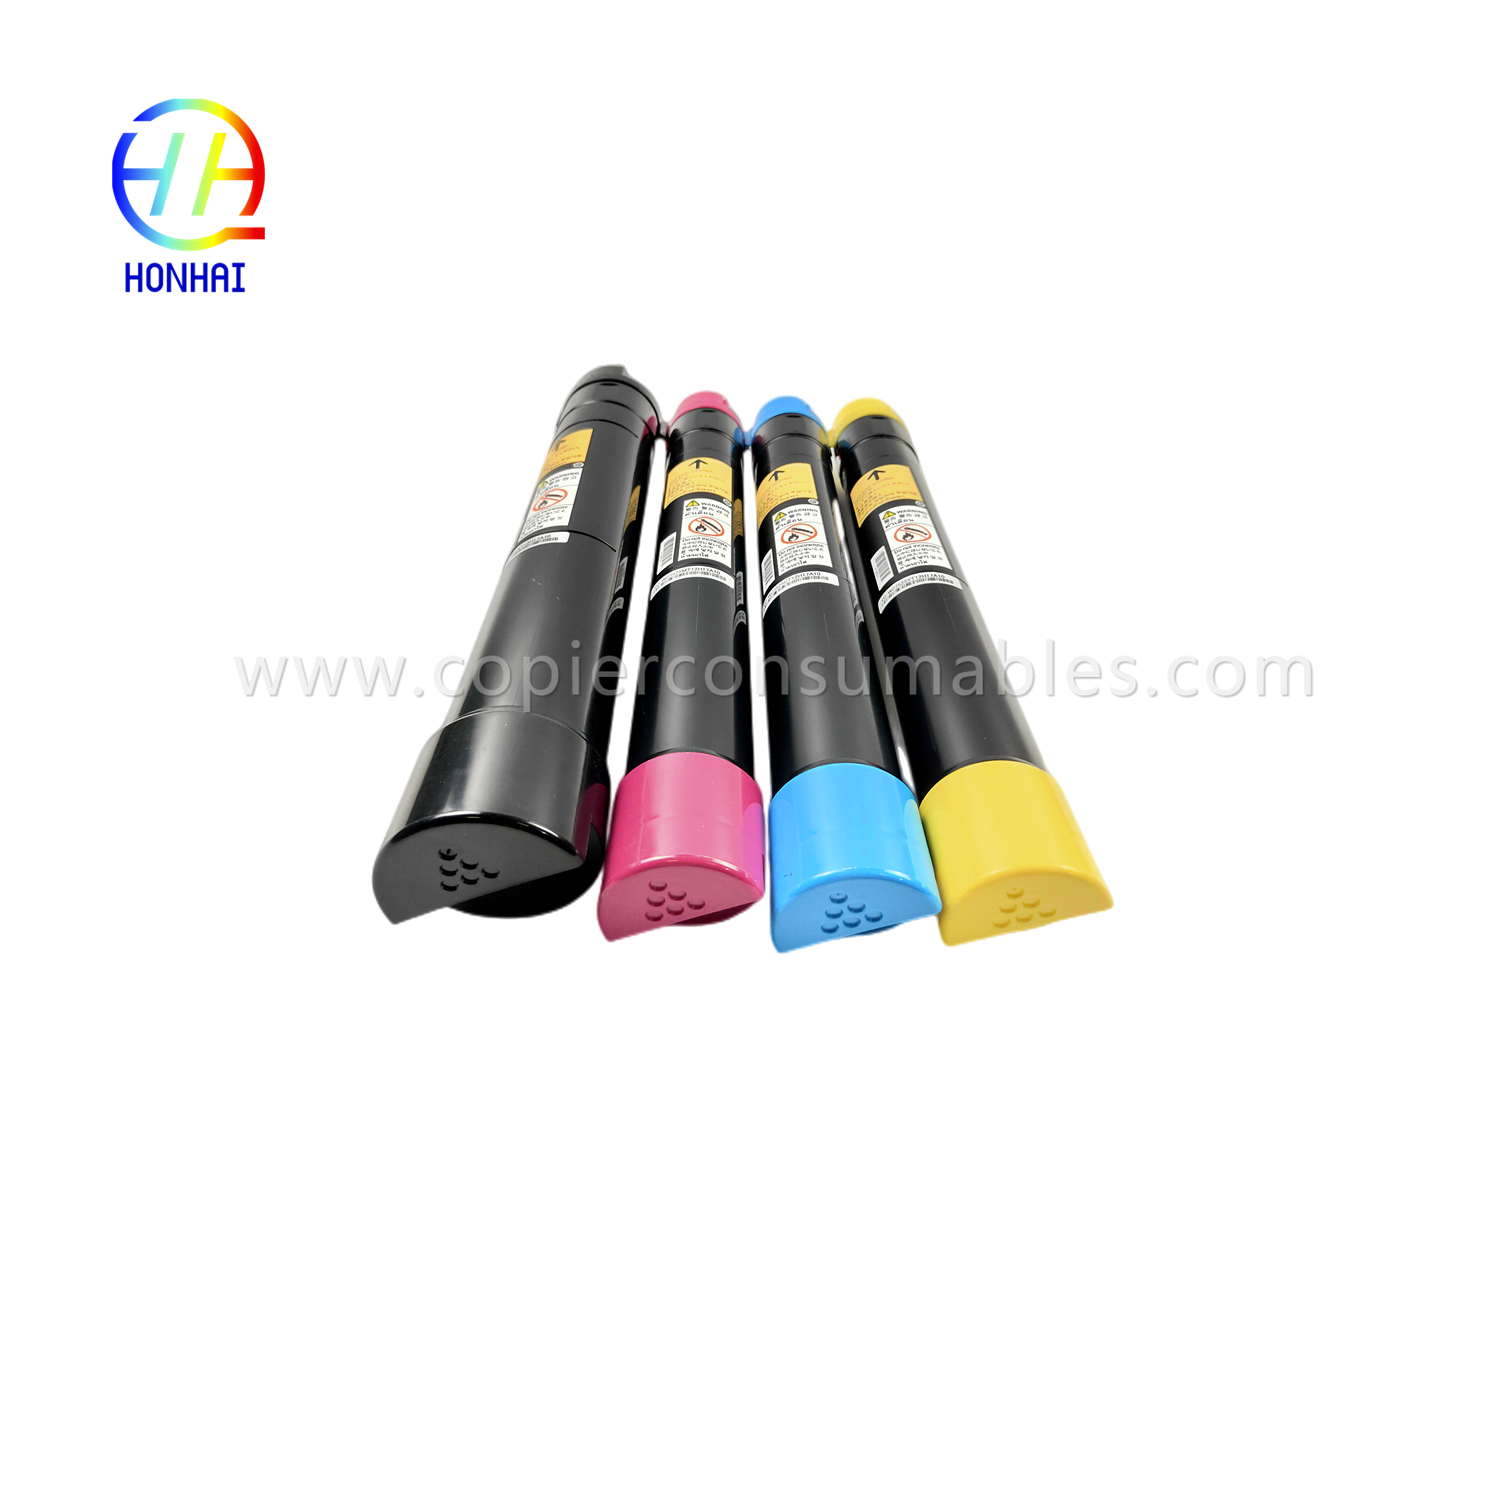 https://www.copierconsumables.com/toner-cartridge-imported-powder-set-bcmy-for-xerox-workcentre-7830-7835-7845-7855-7970-7525-7530-7535-7545-75561003 006r01514-006r01515-006r01516-ထုတ်ကုန်/